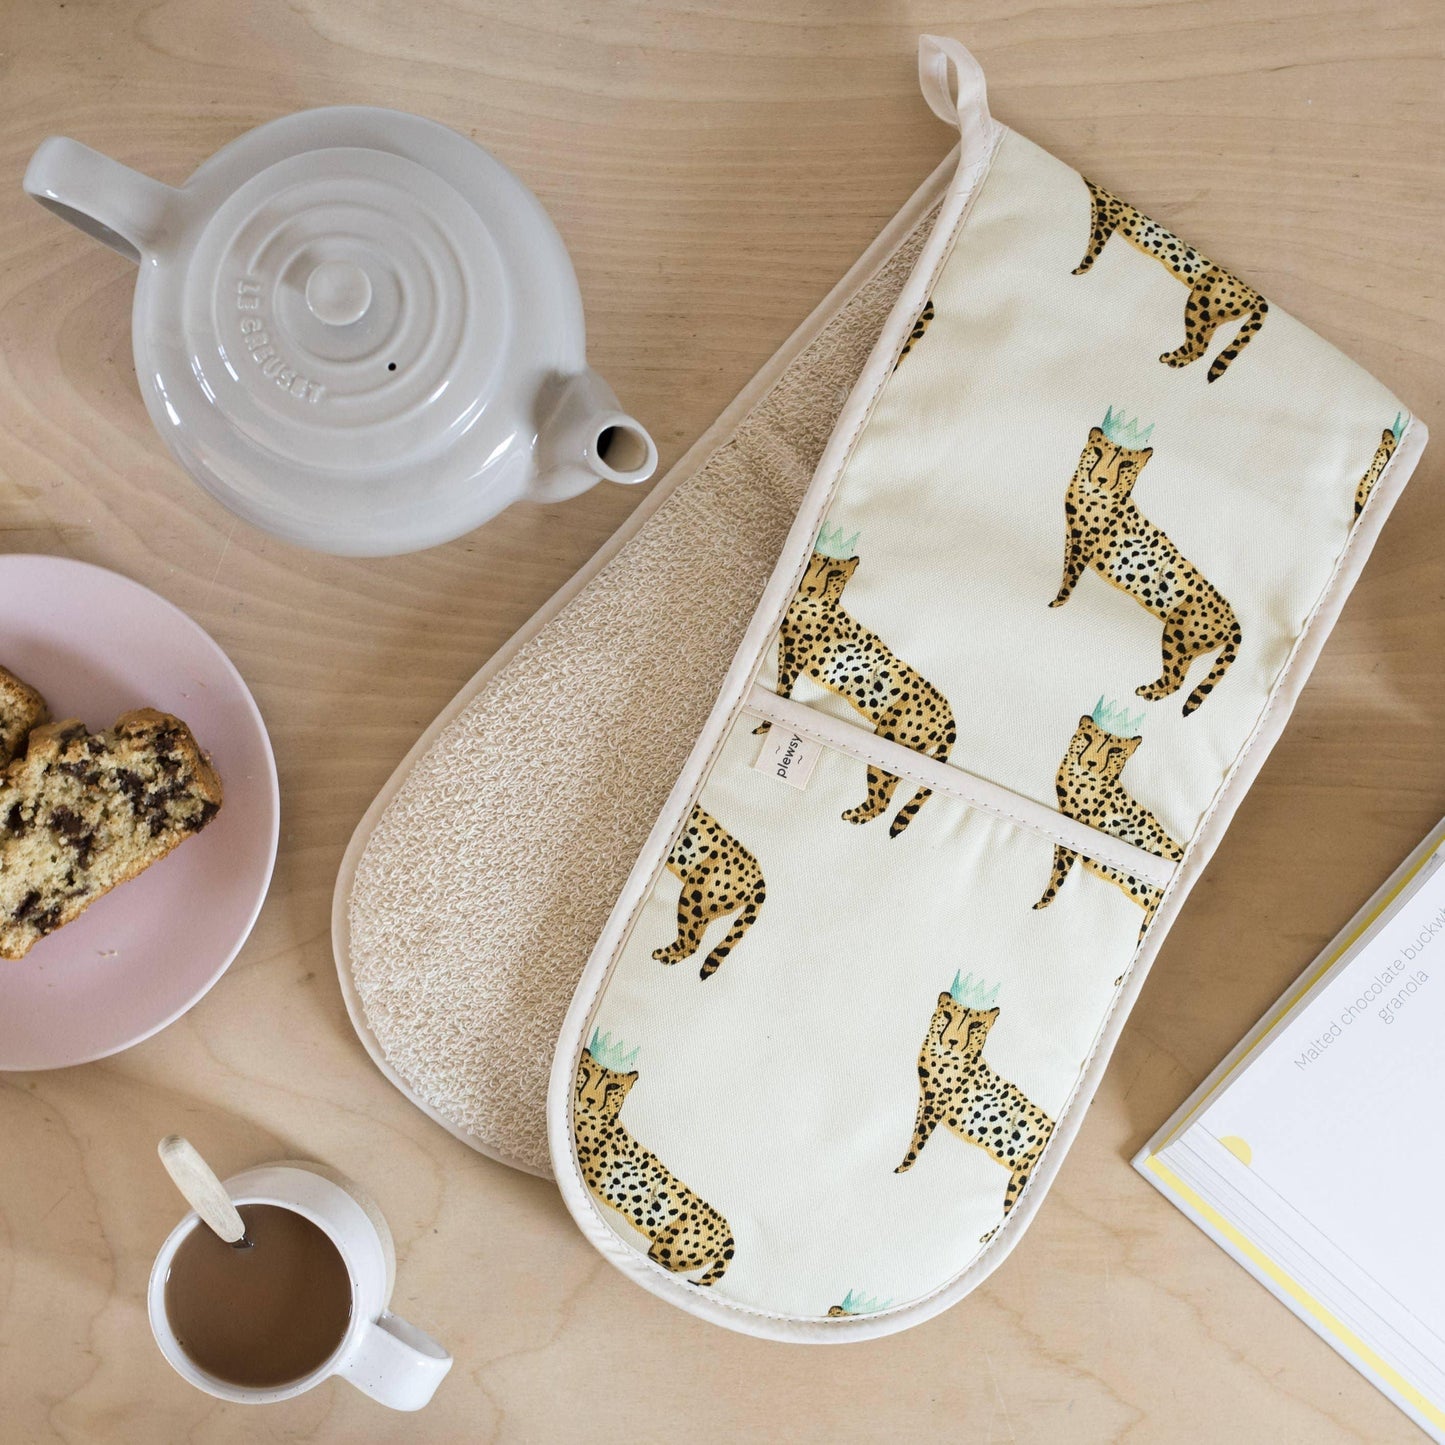 Cheetah Oven Gloves - Sorelle Gifts